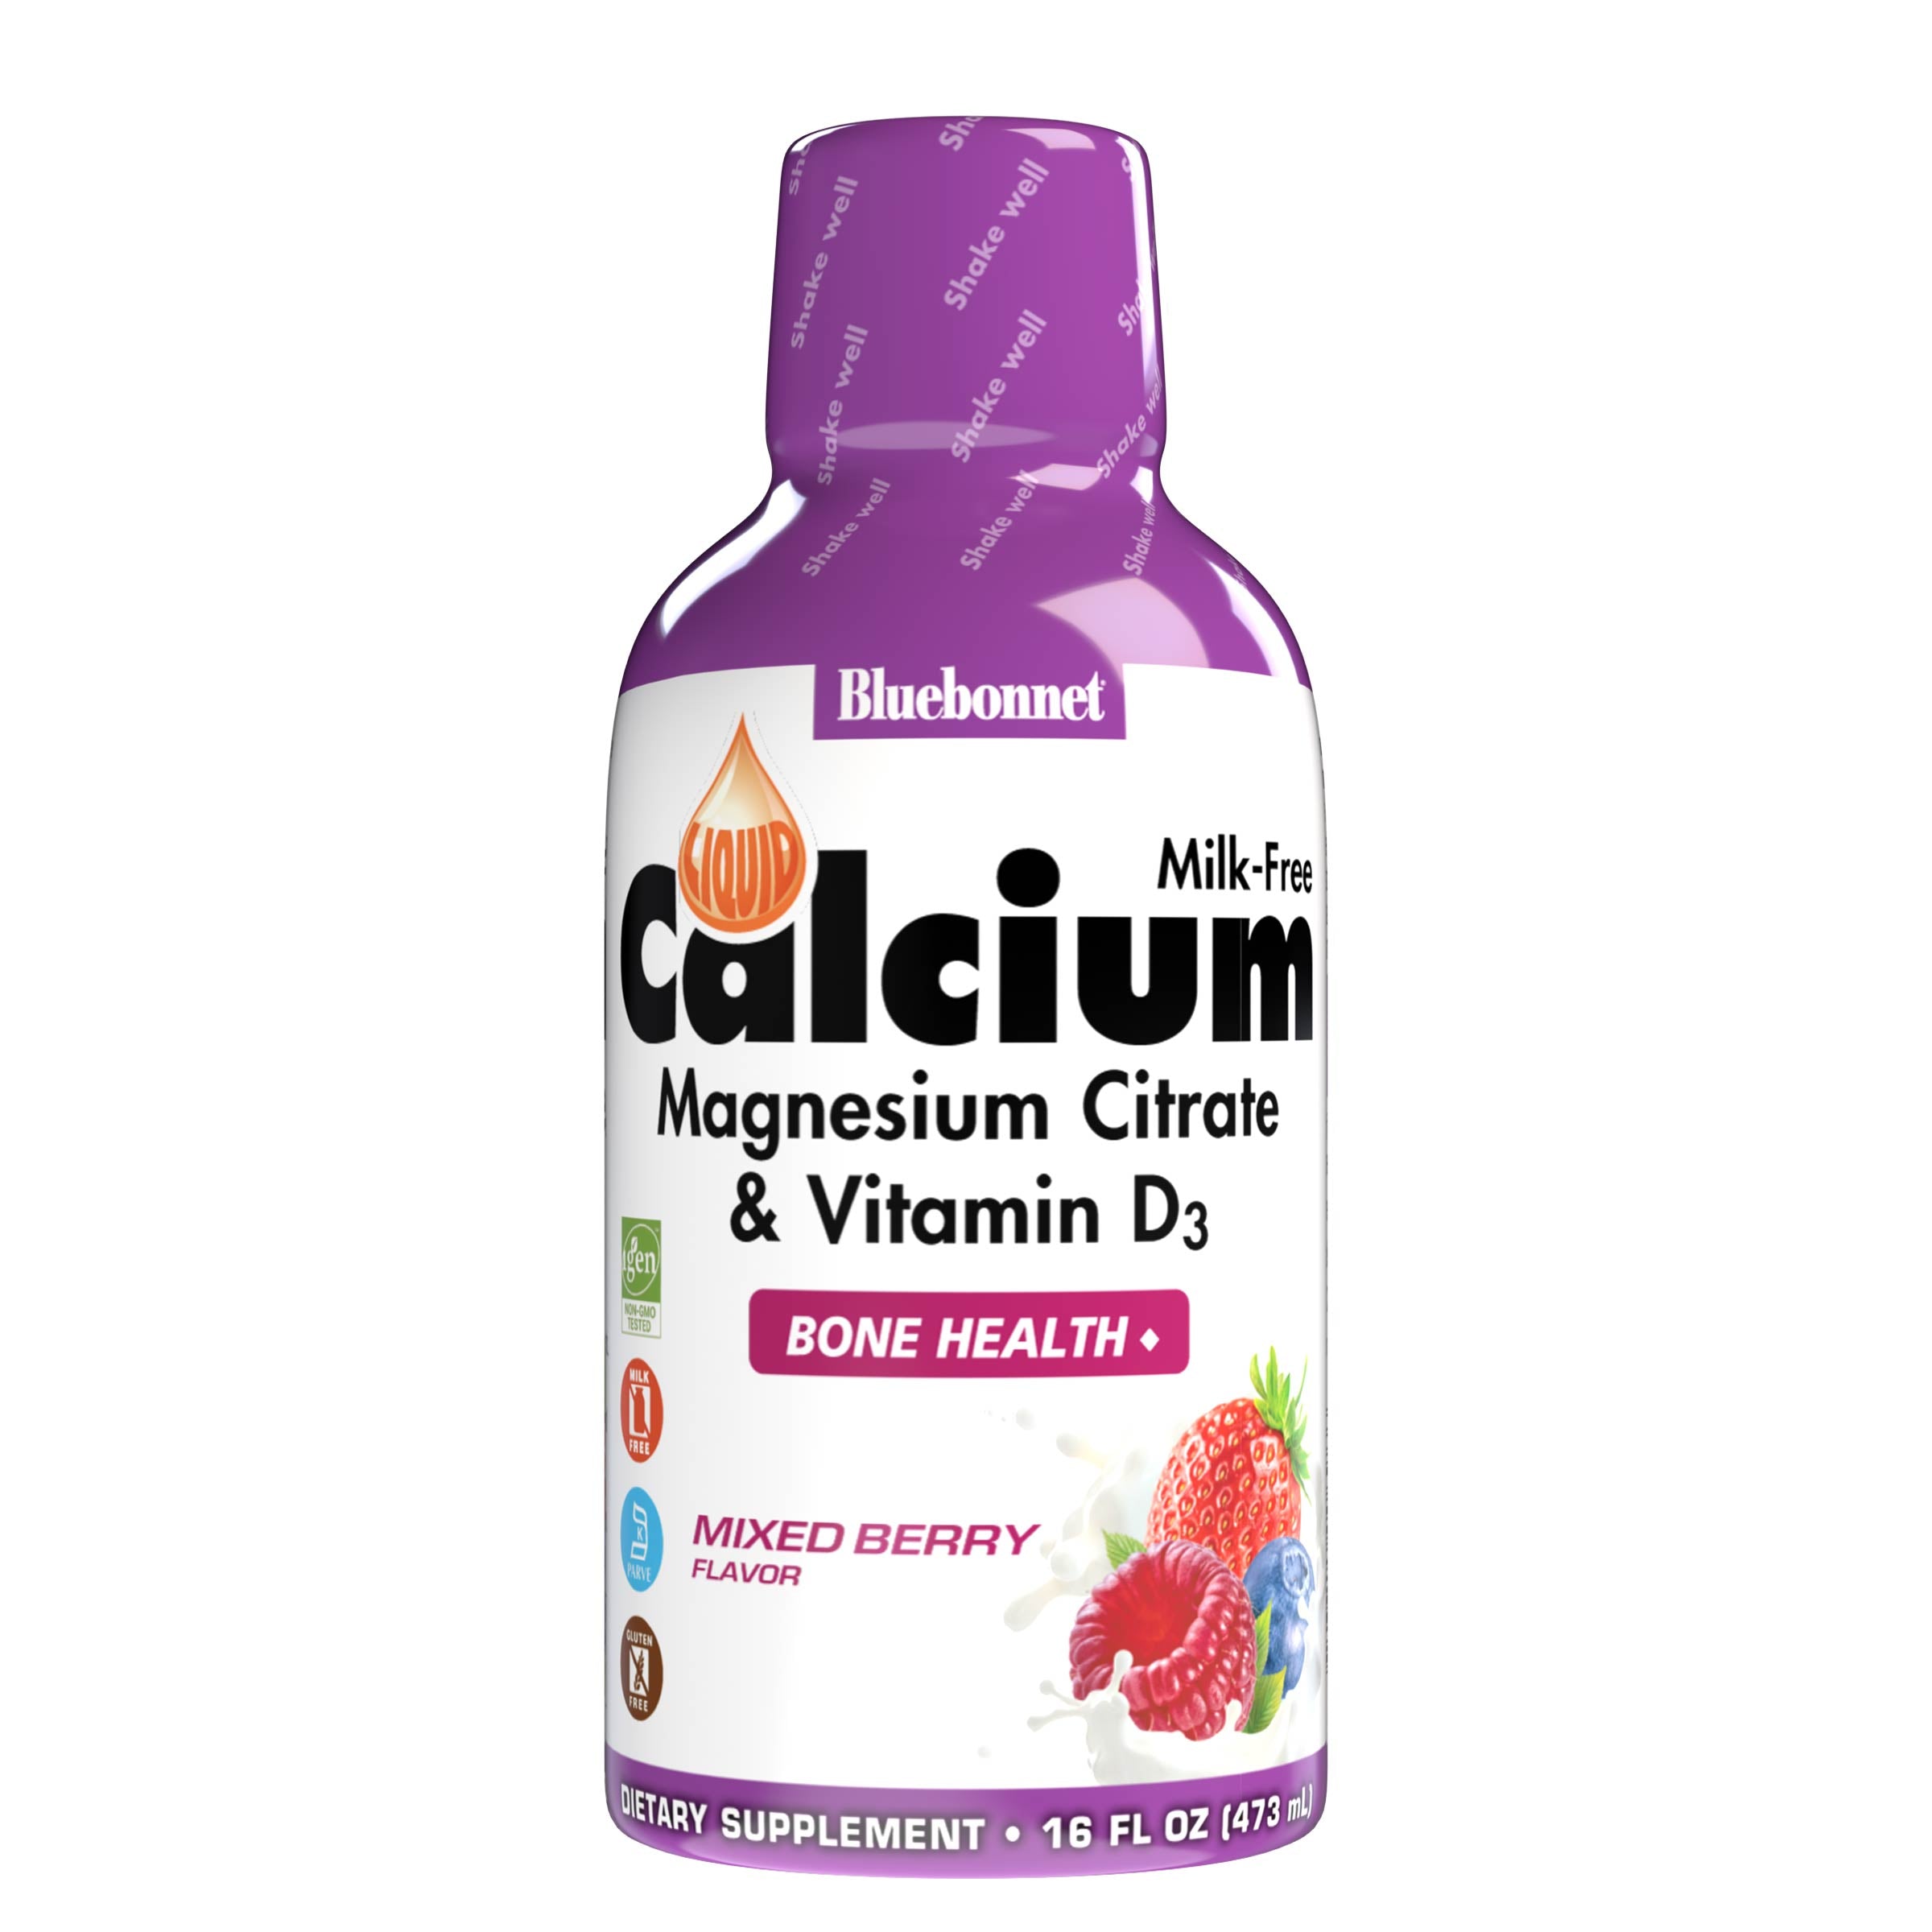 Bluebonnet's Liquid Calcium Magnesium Citrate with Vitamin D3 are formulated with calcium in a chelate of calcium citrate, as well as magnesium in a chelate of magnesium citrate and magnesium aspartate in a delicious mixed berry flavor. Plus, this formula are formulated with vitamin D3 (cholecalciferol) from lanolin for strong healthy bones. #size_16 fl oz